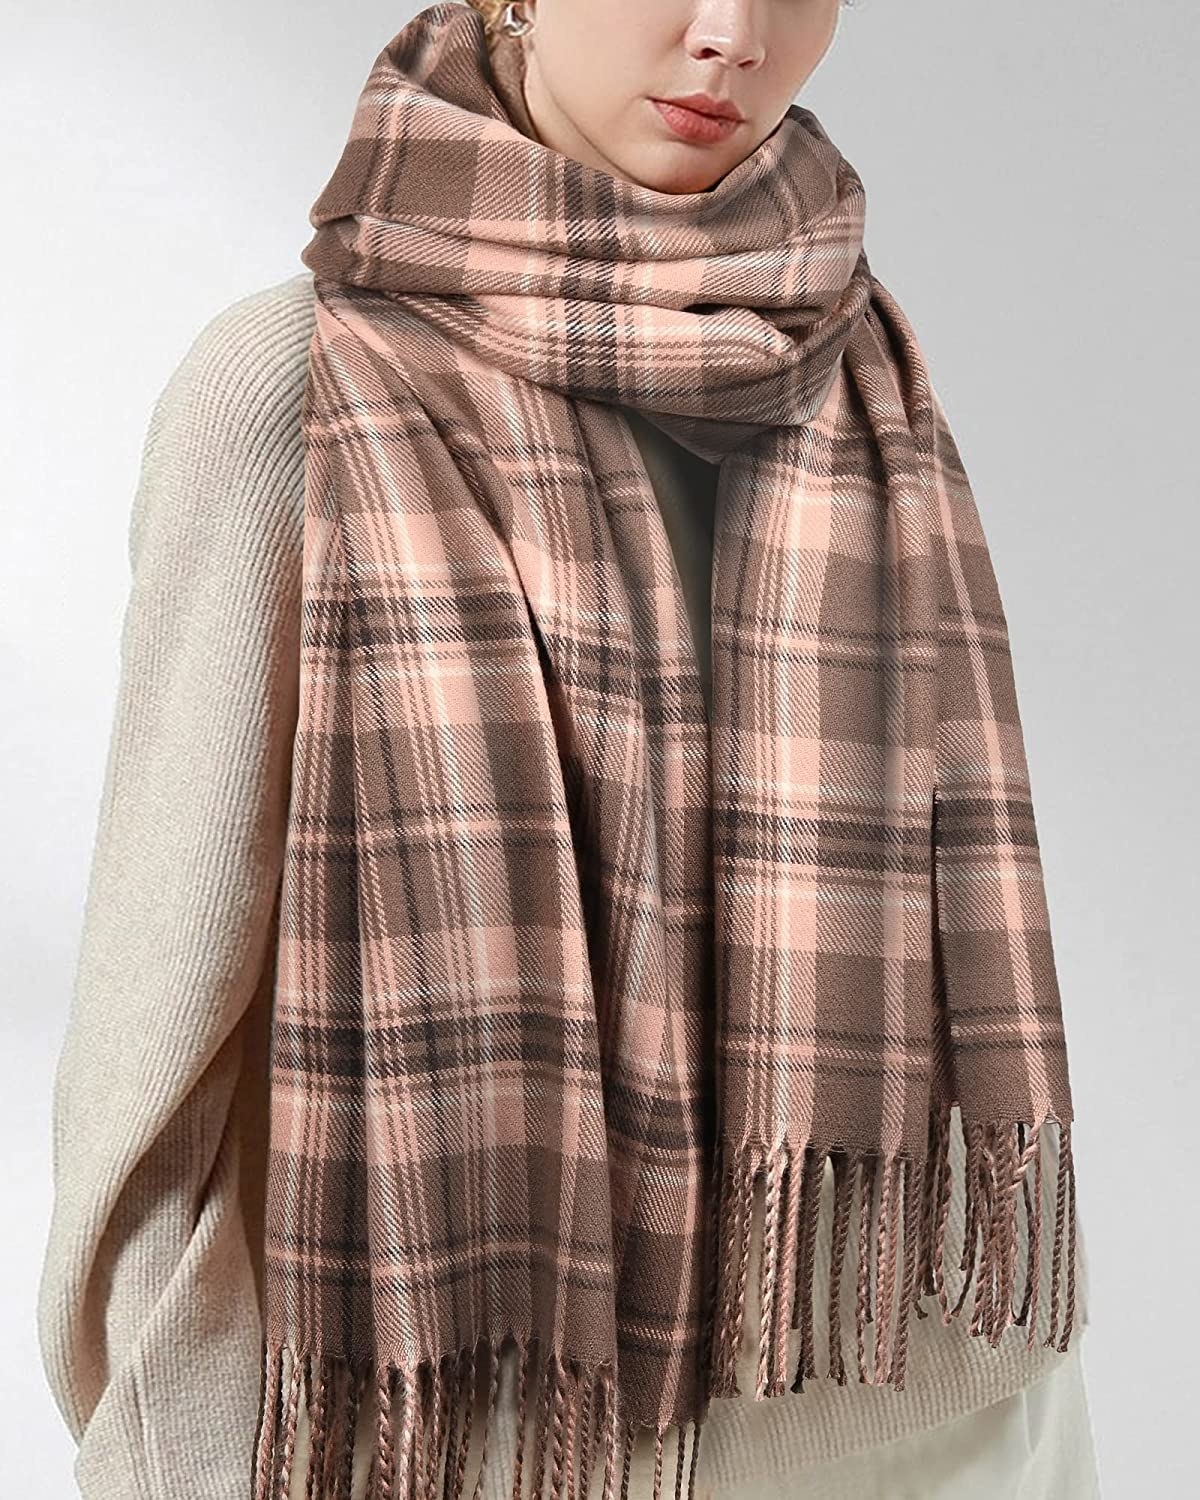 A model wearing a brown and pink plaid scarf